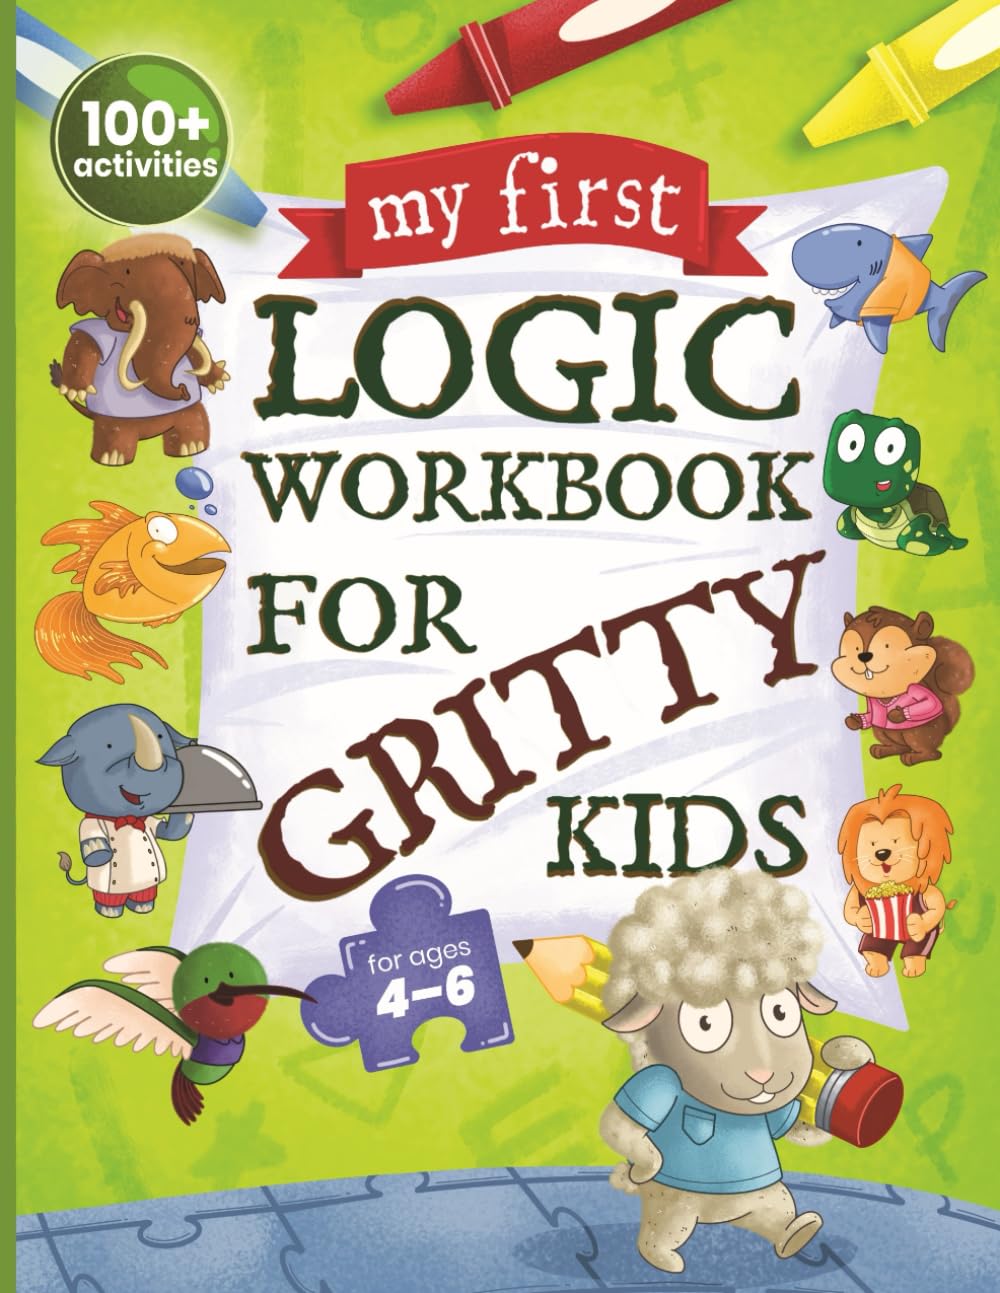 My First Logic Workbook for Gritty Kids: Spatial Reasoning, Math Puzzles, Logic Problems, Focus Activities. (Develop Problem Solving, Critical Thinkin by Allbaugh, Dan